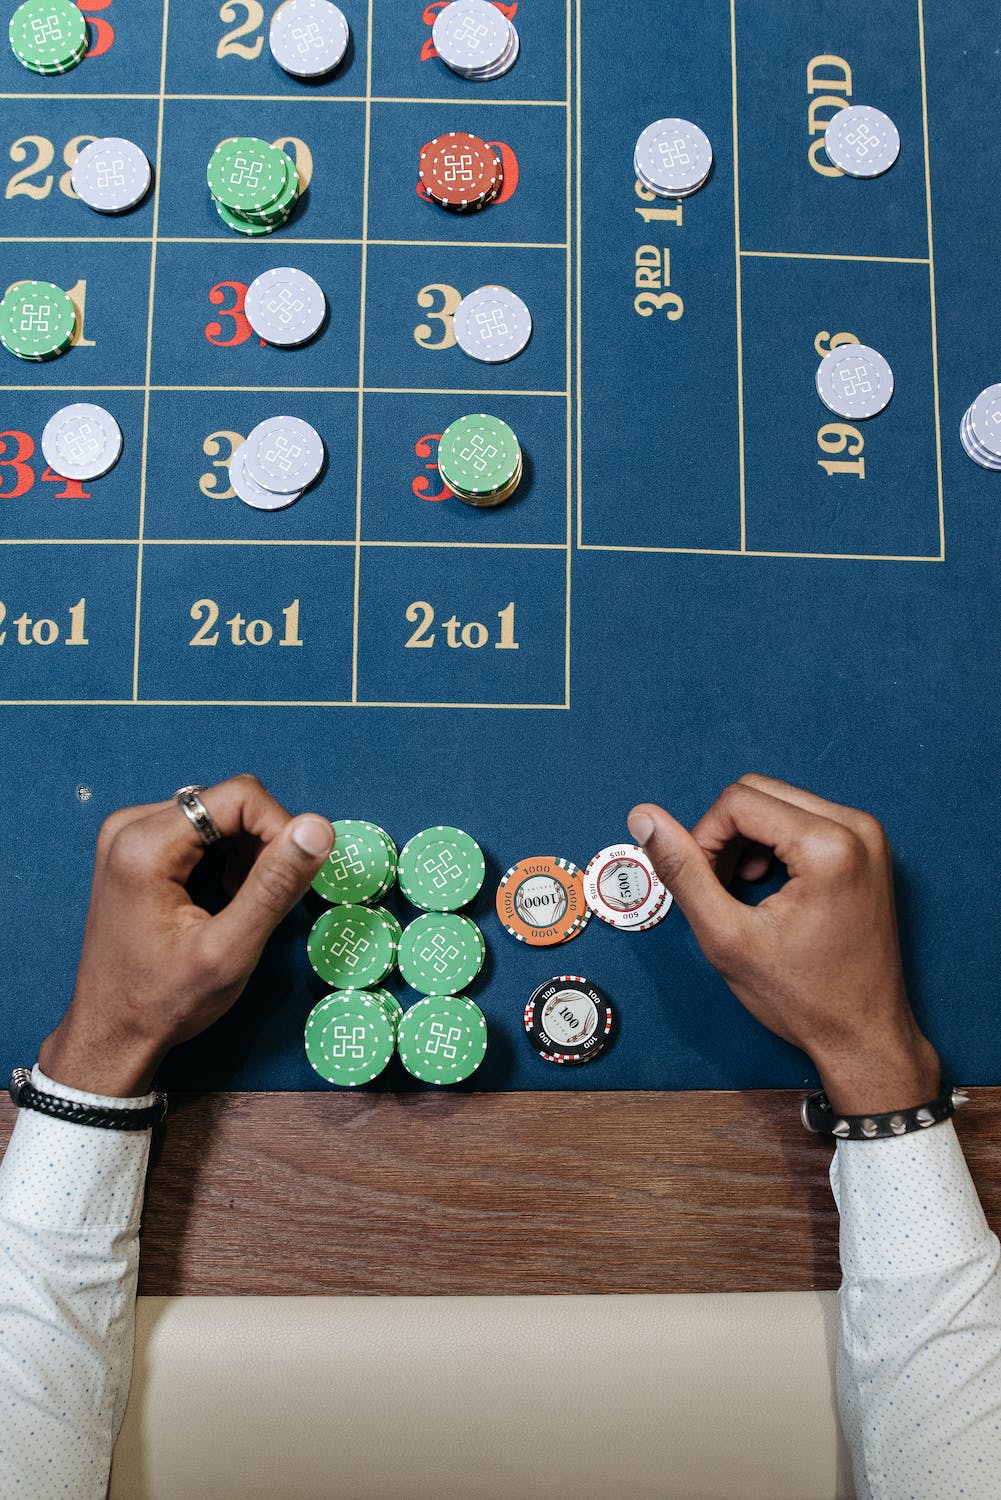 Bankroll Management in Roulette: How to Play Smart and Stay In Control